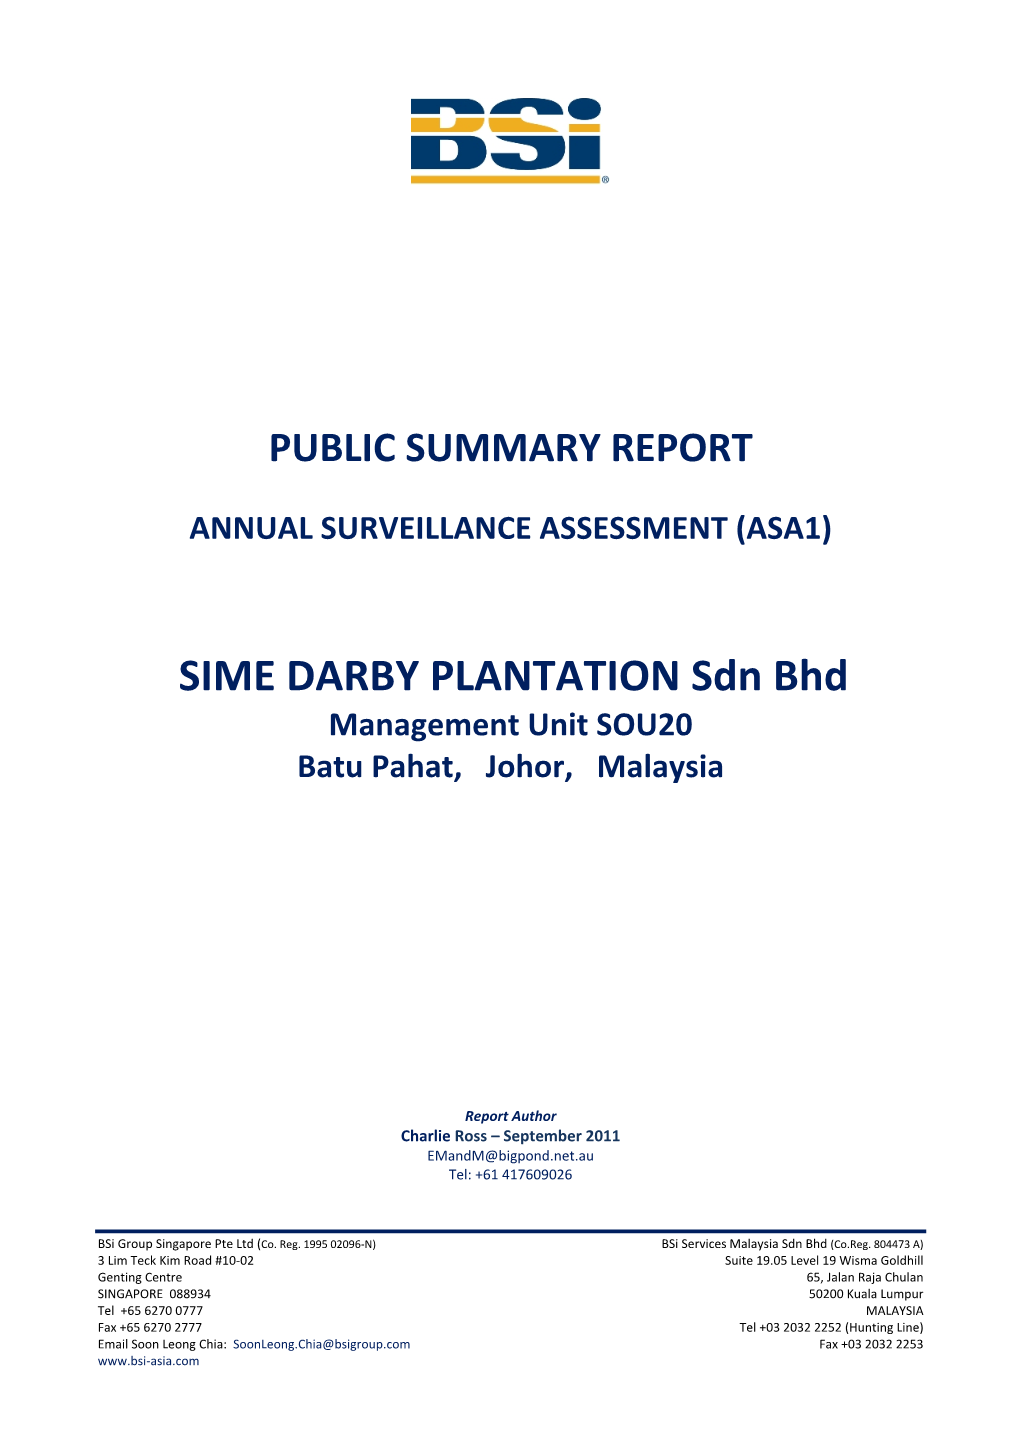 Sime Darby Plantation Sdn Bhd (SOU20) Public Summary Report – RSPO Annual Surveillance Assessment (ASA1) Page 2